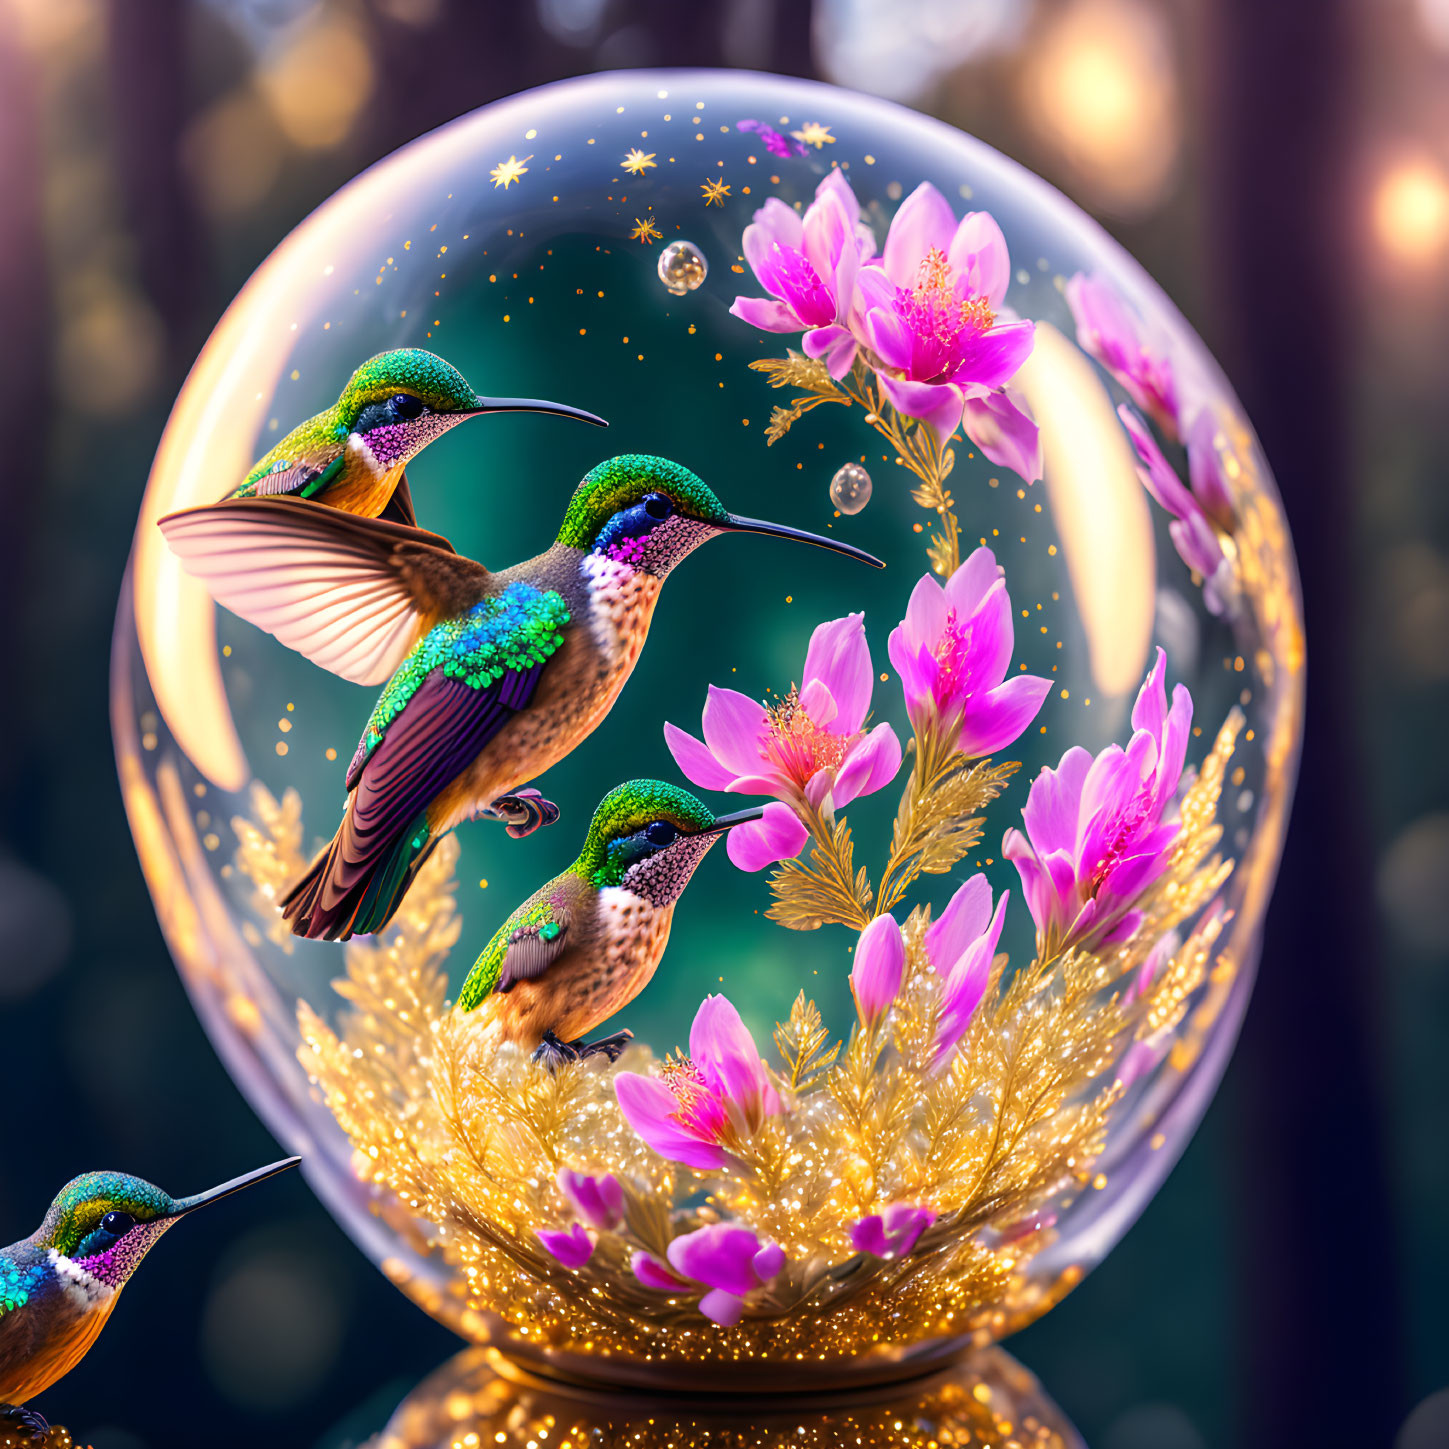 Colorful crystal ball with hummingbirds, pink blossoms, and golden accents on bokeh-lit